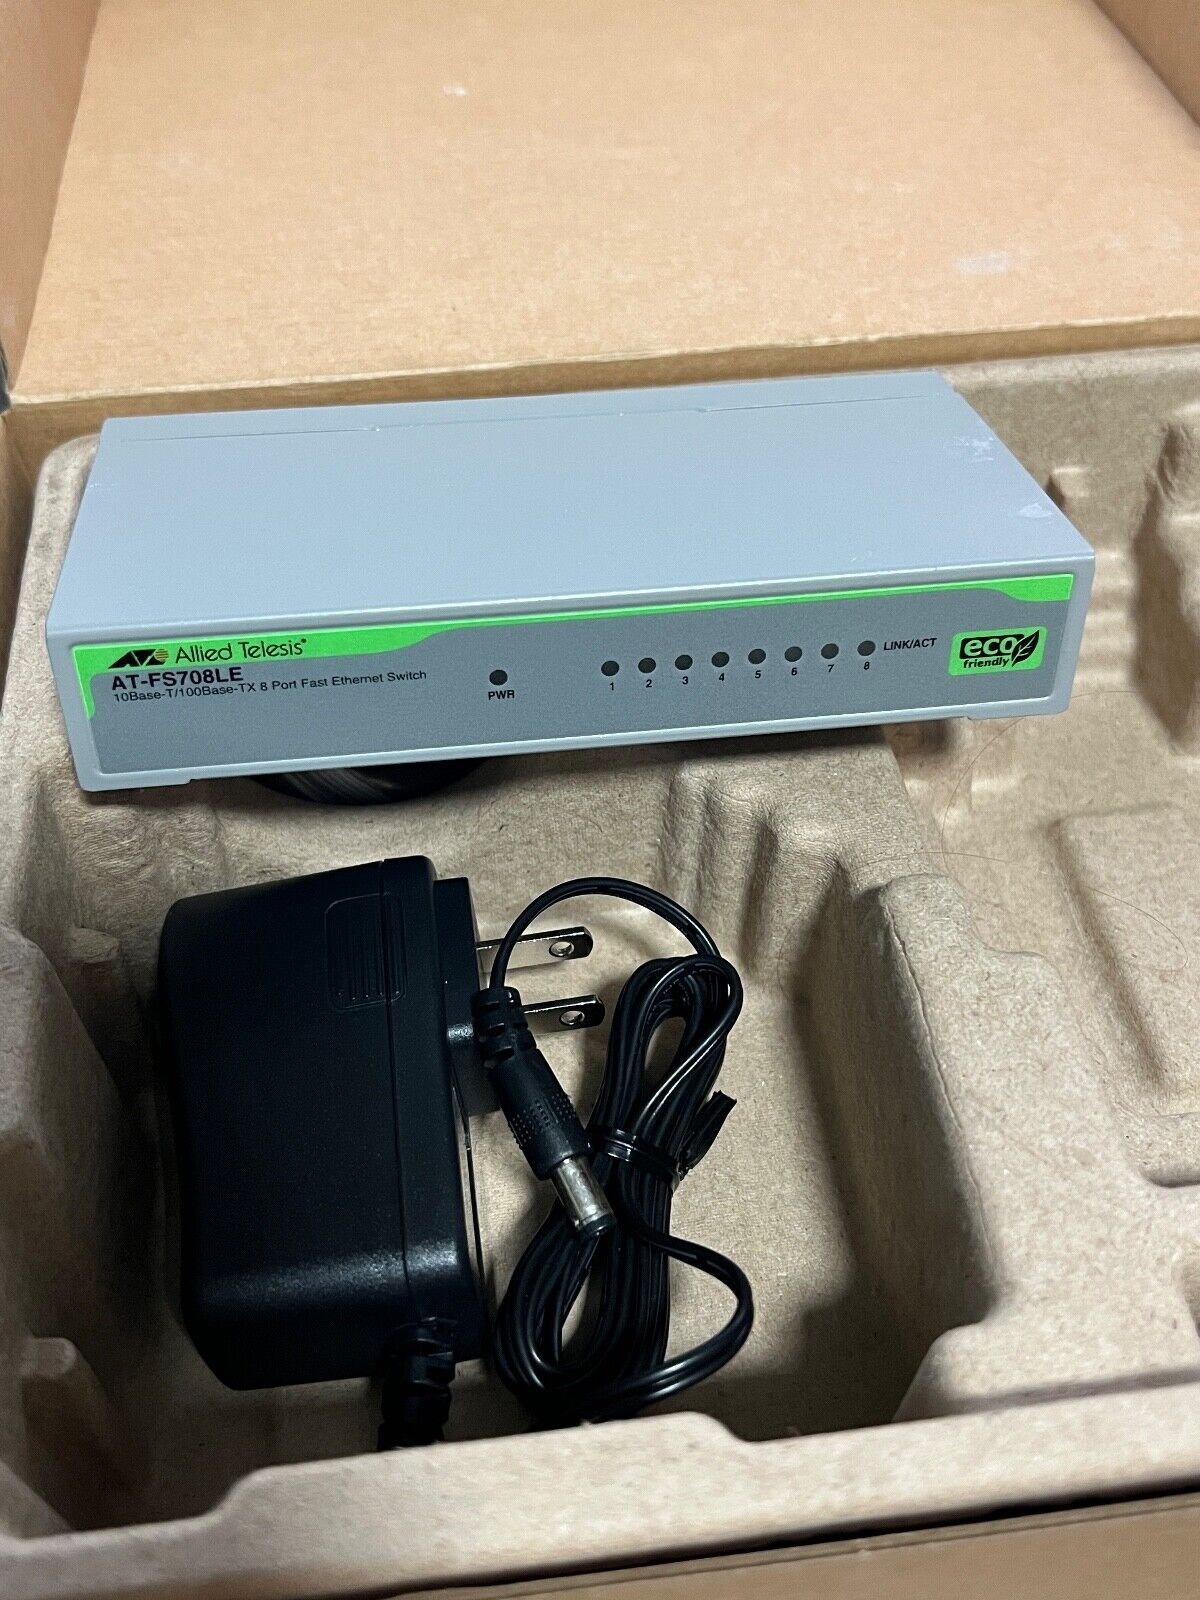 Allied Telesis AT-FS708LE-10 8-port Fast Ethernet Switch New in Box